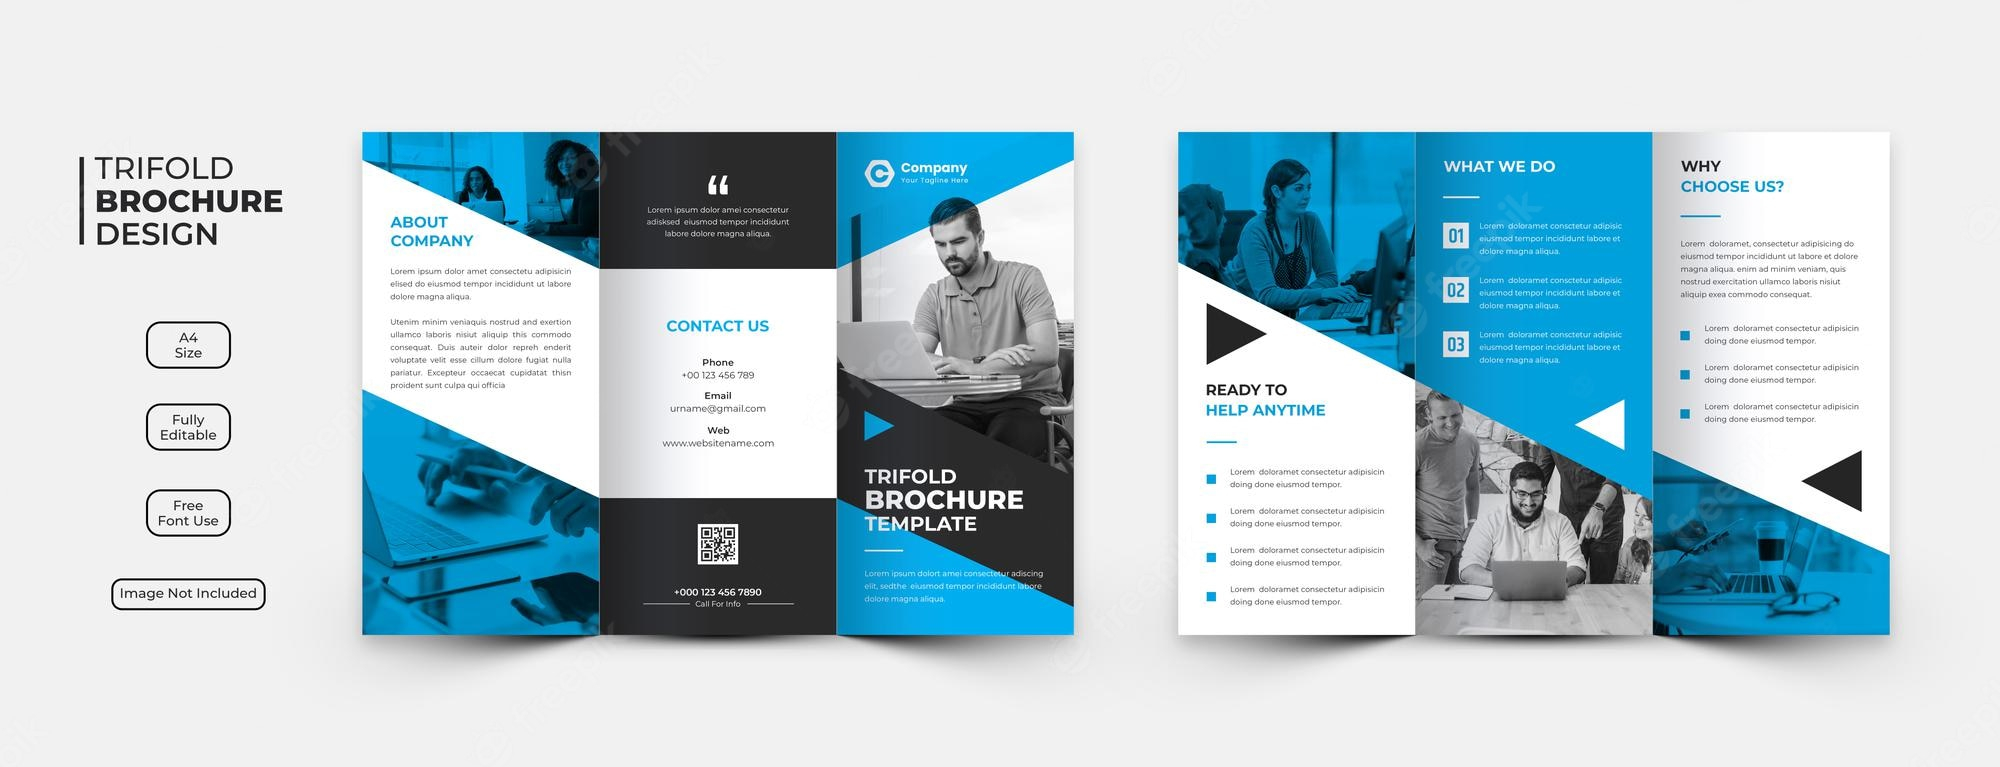 Free PSD  Creative business trifold brochure template